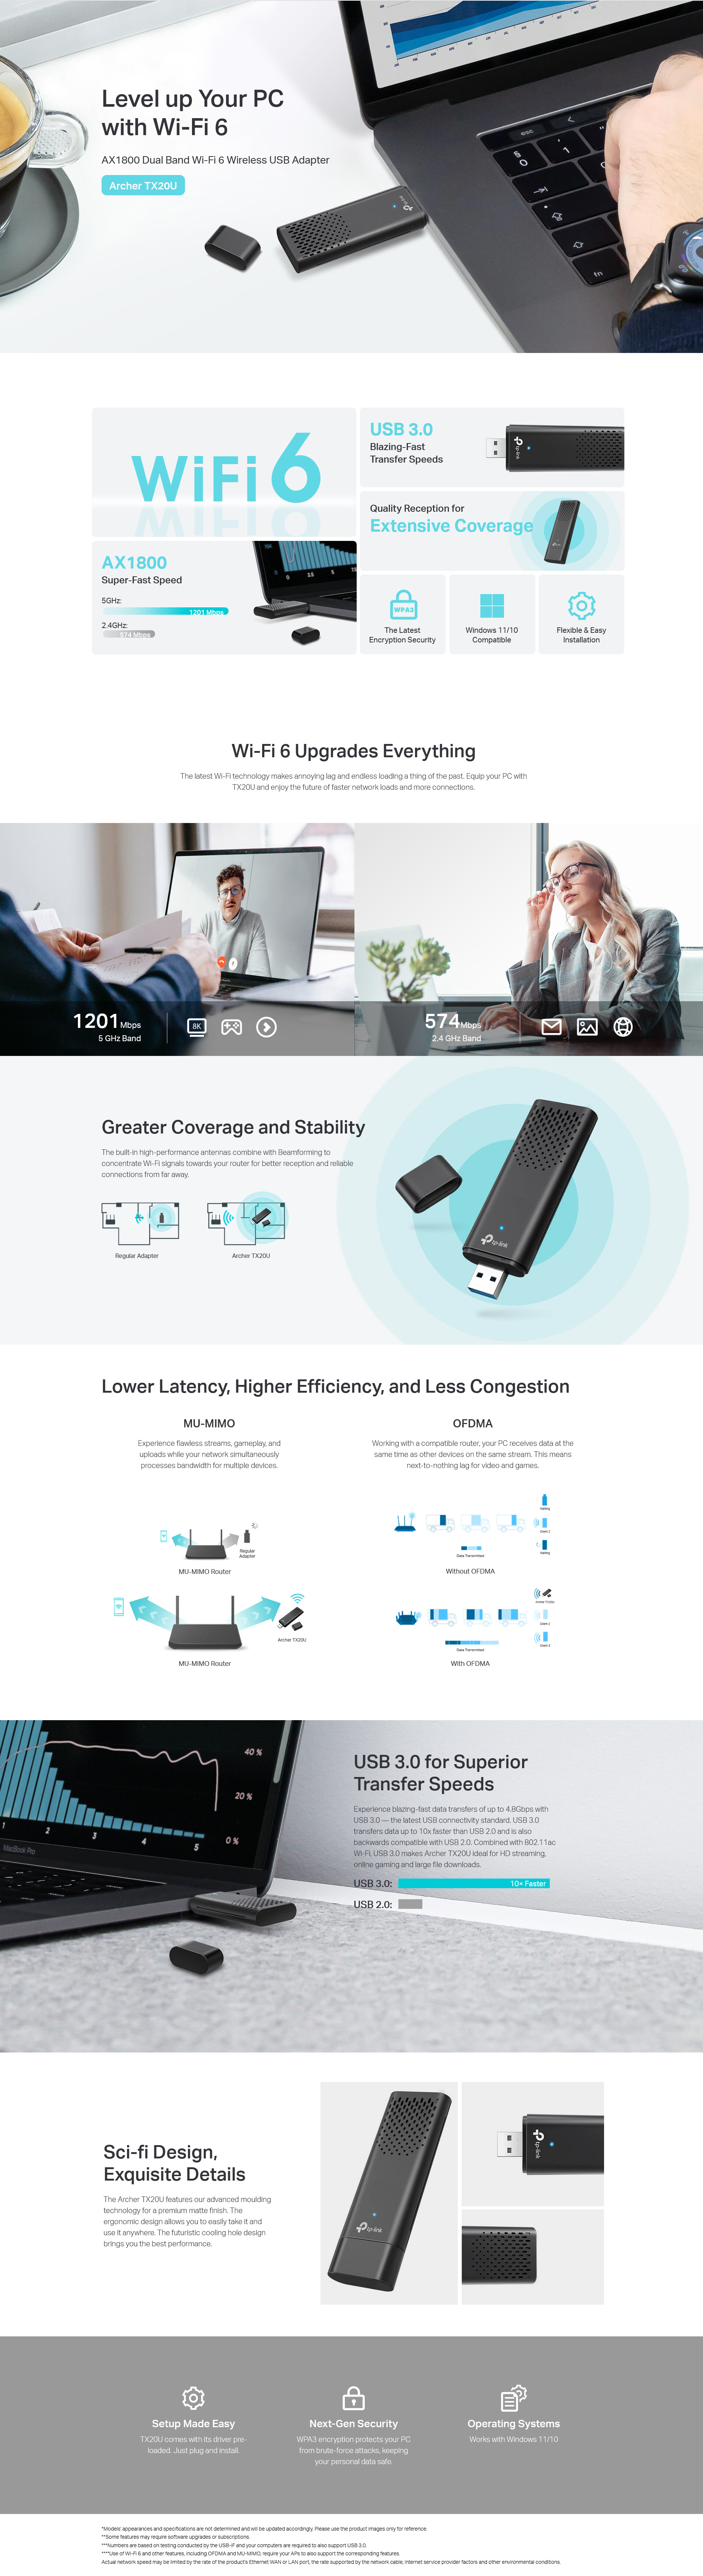 A large marketing image providing additional information about the product TP-Link Archer TX20U - AX1800 Dual-Band Wi-Fi 6 USB Adapter - Additional alt info not provided